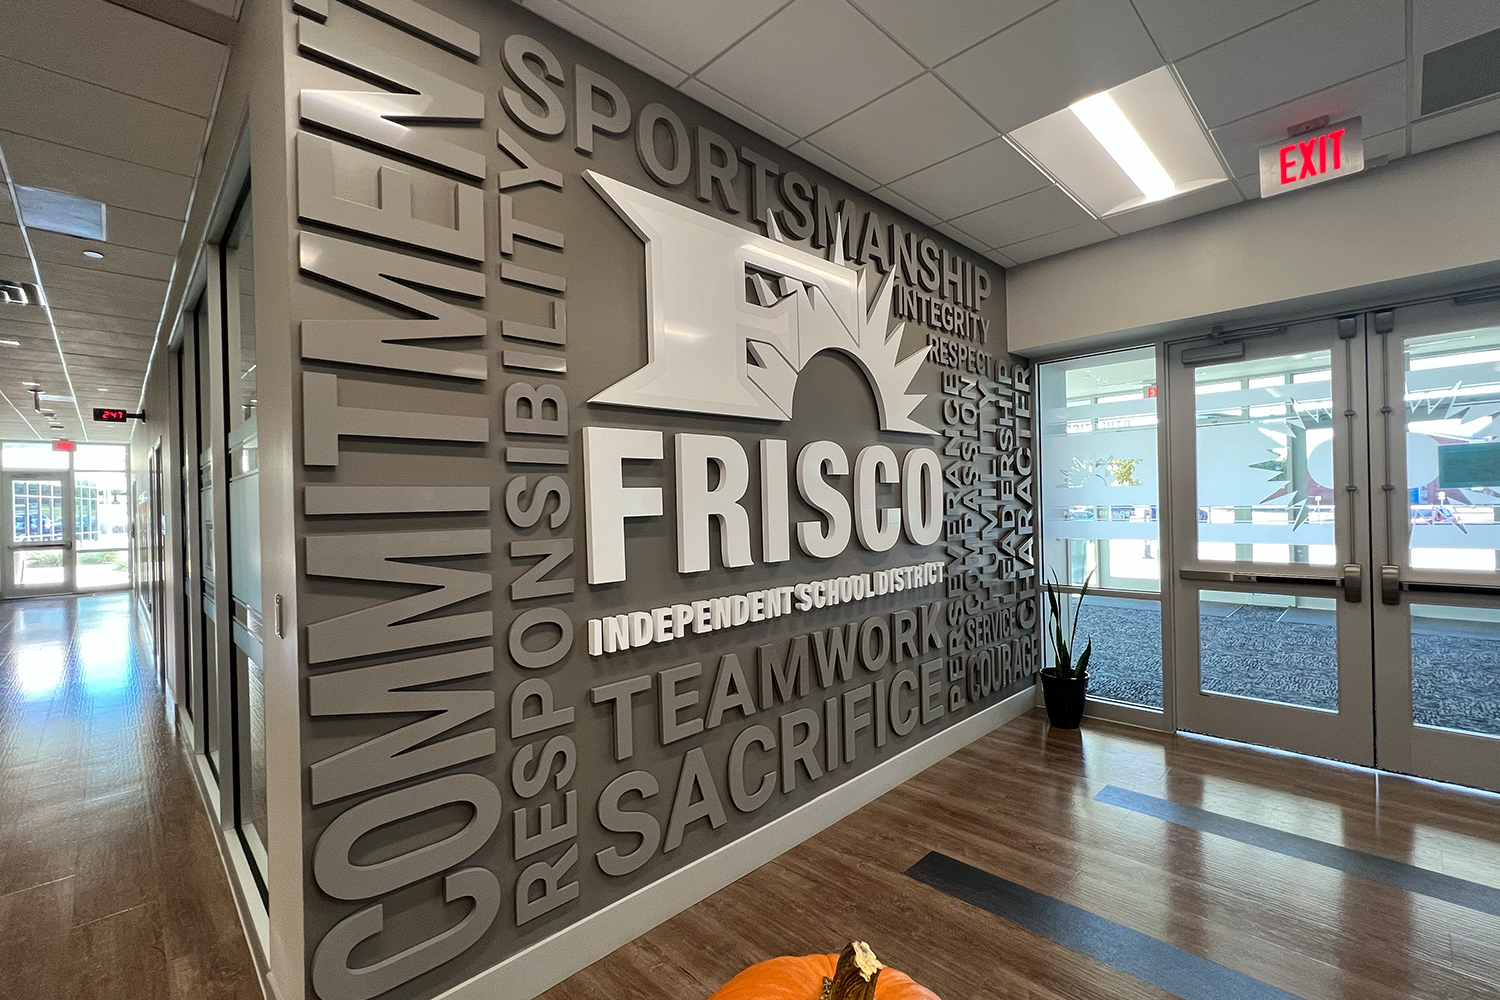 Opening less than two years ago, Frisco ISDs Athletic Office is set to be the future home to the districts Hall of Honor recognizing athletes, coaches, trainers, and others involved in the districts athletic success. 